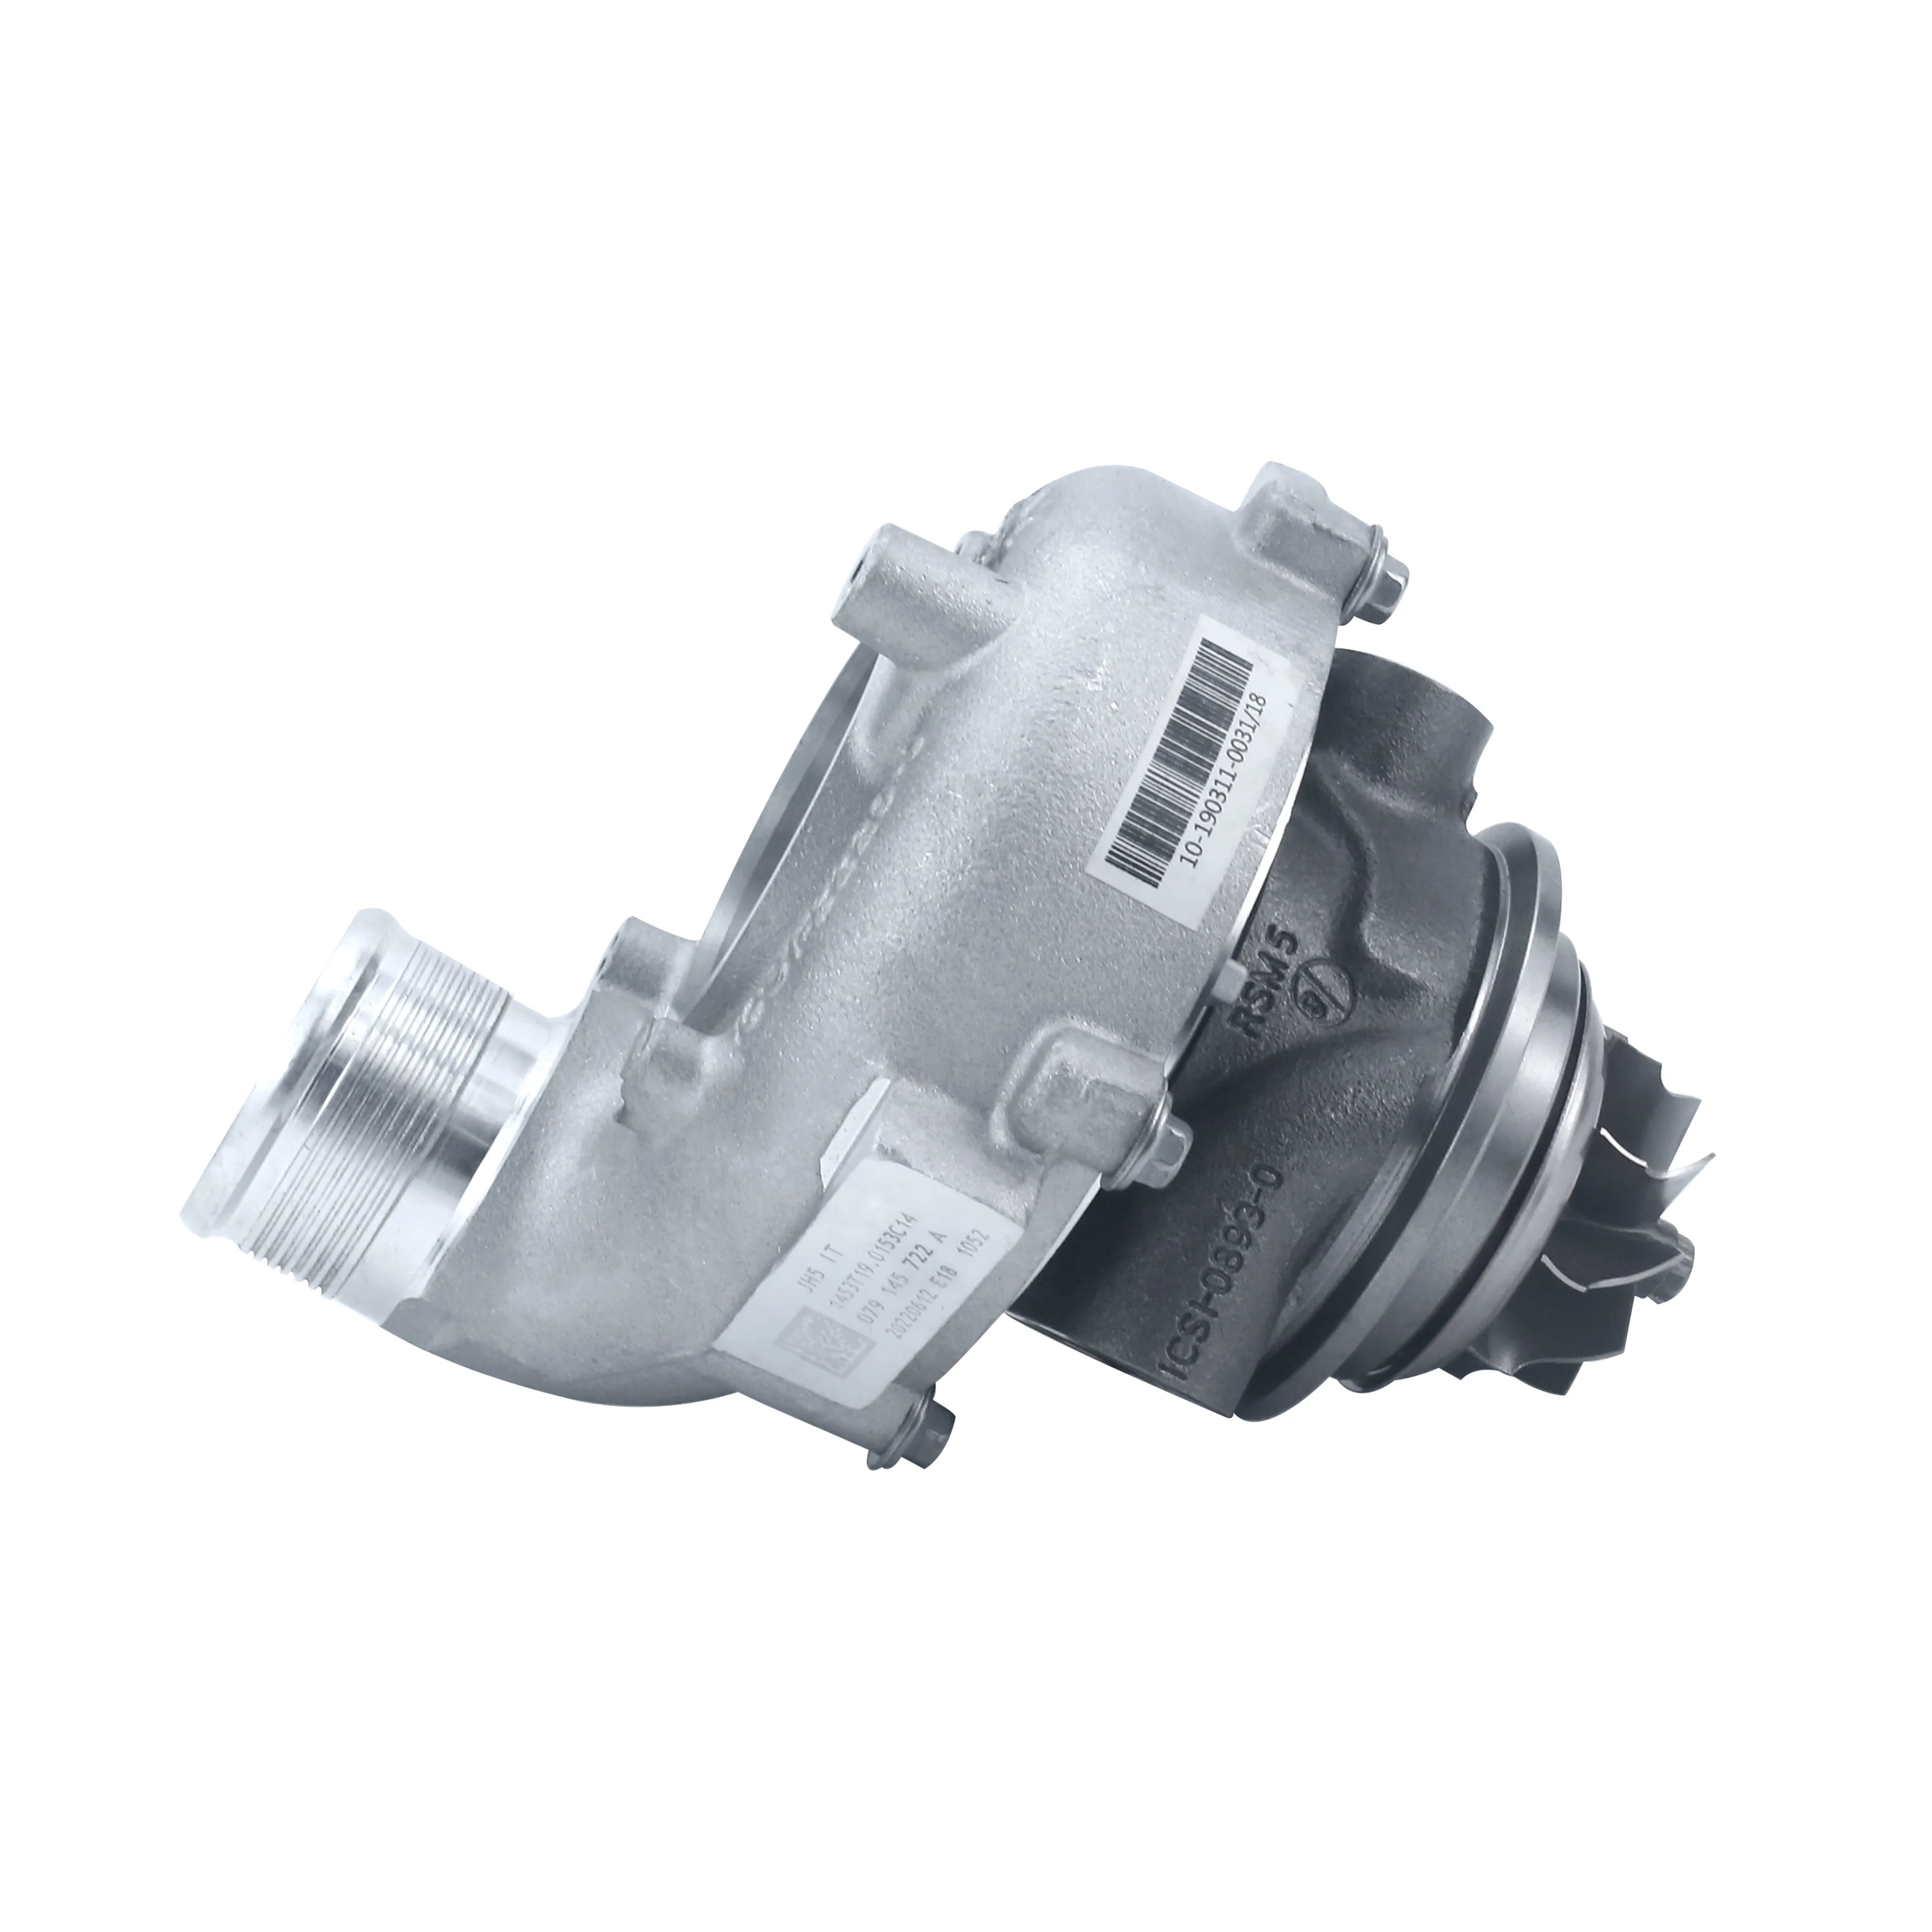 

Factory Made Auto Part 079-145-722-A Turbocharger Turbo Core for A8 2012-2016 4.0 TFSI quattro 079145722A